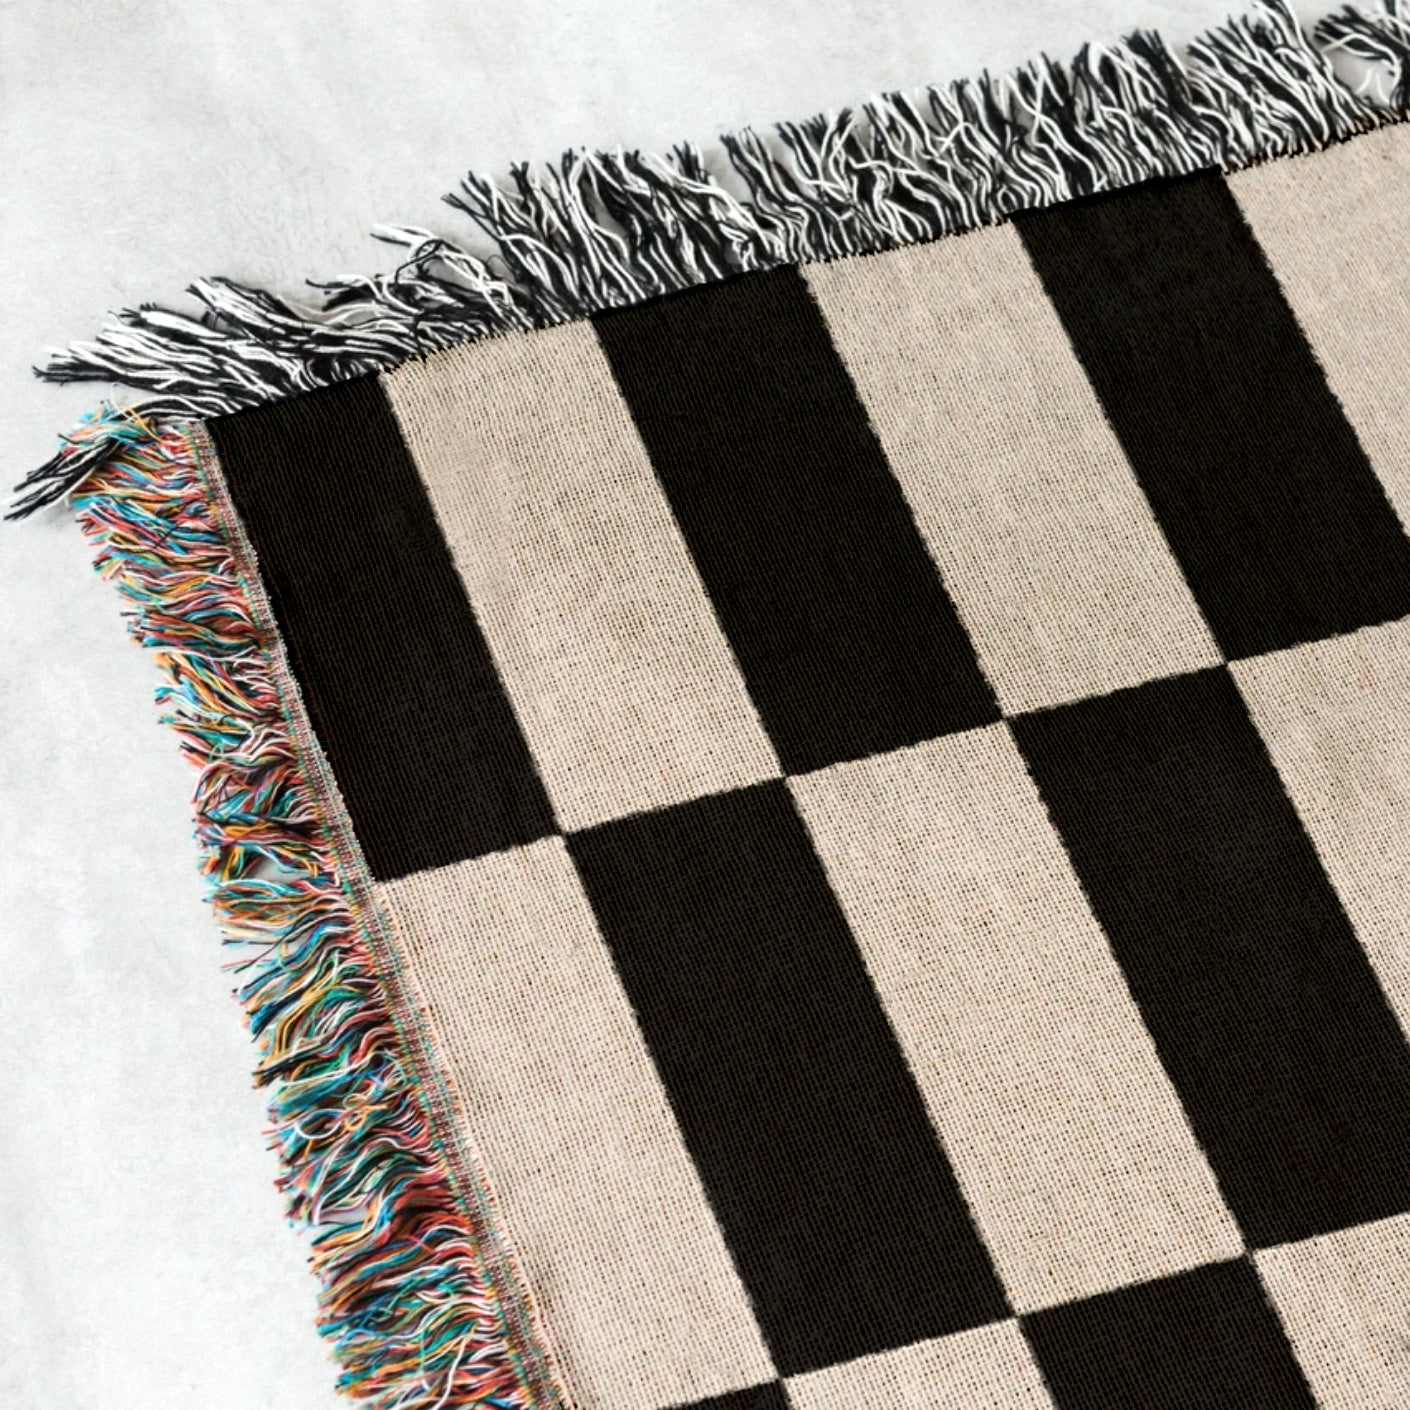 Checkers woven throw blanket. 02 – Anna Pepe x forn Studio